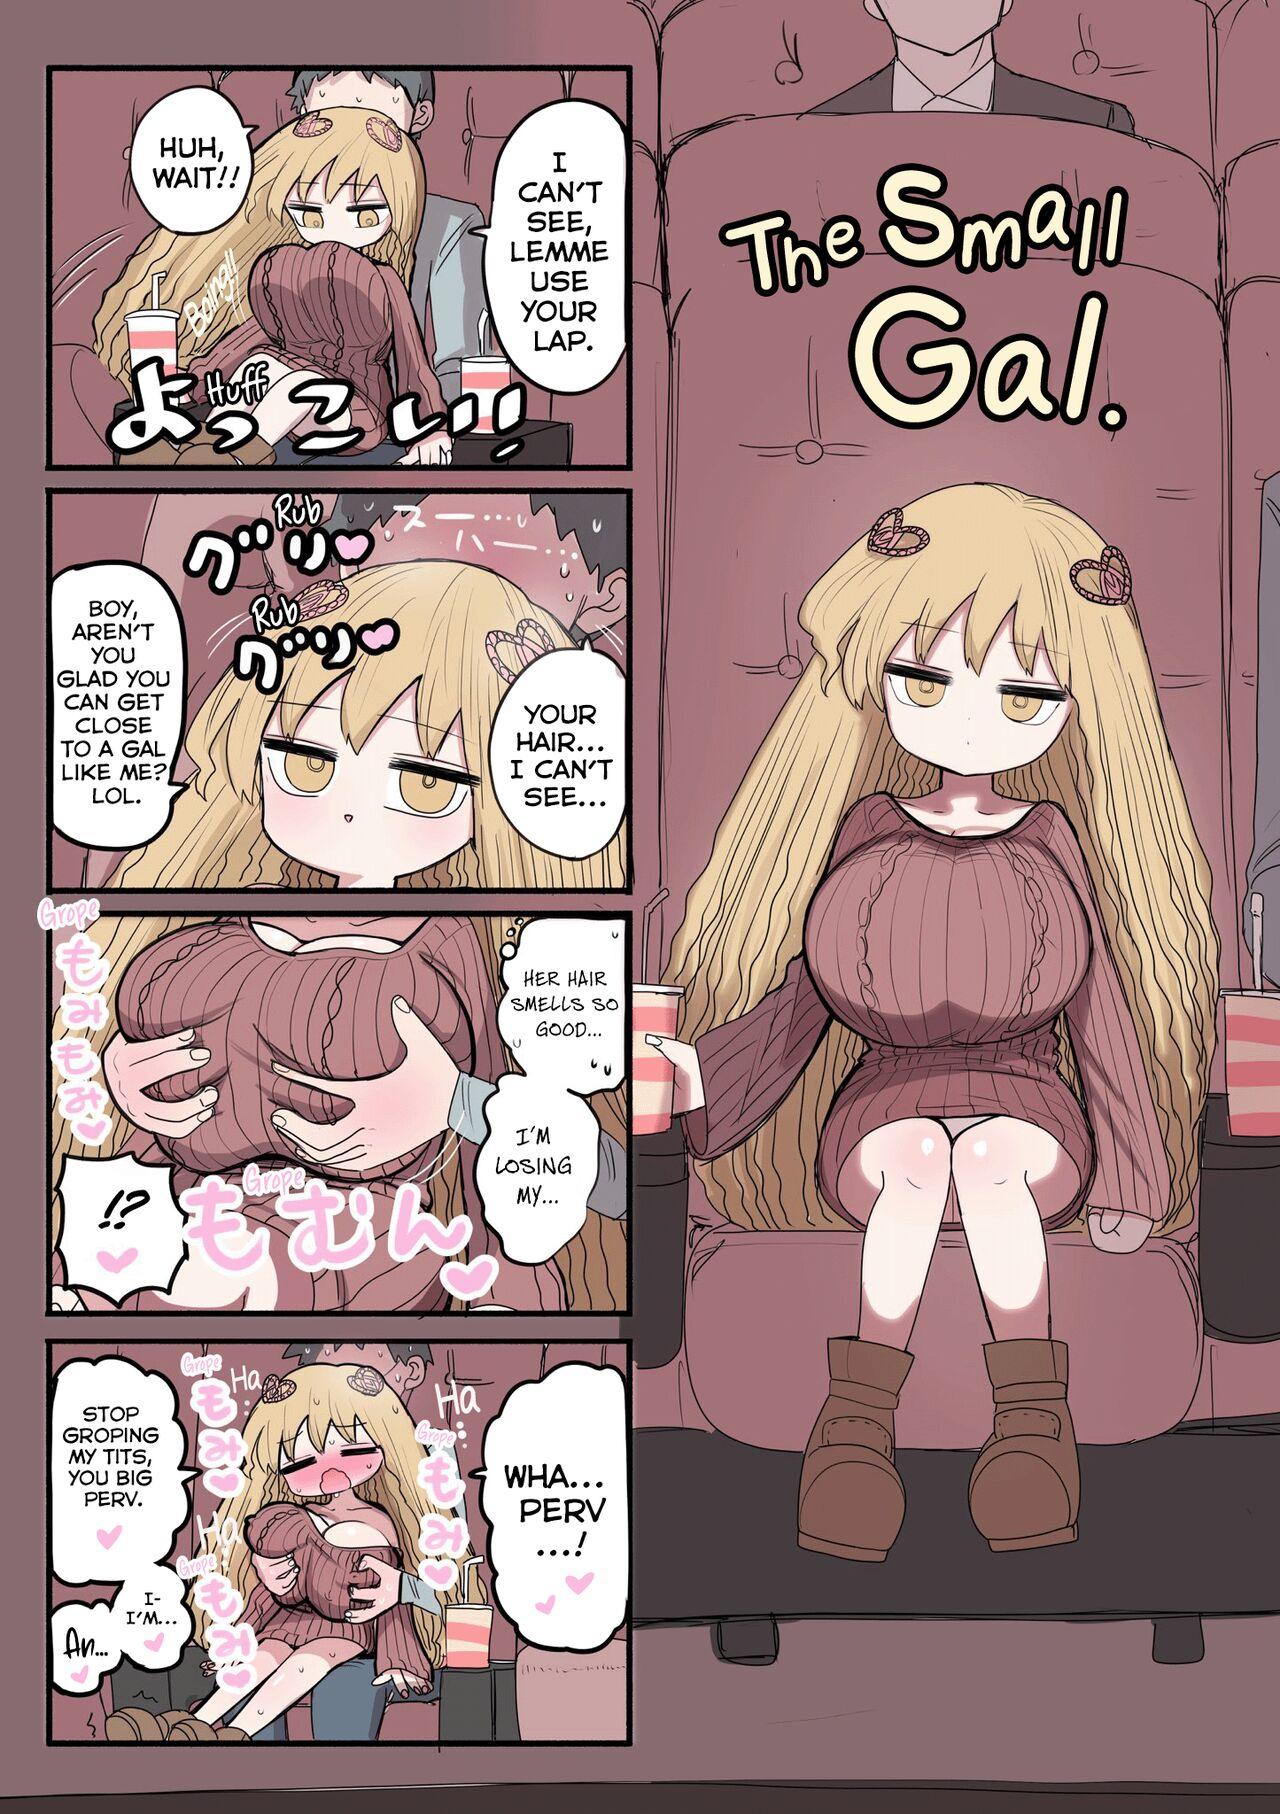 Lips Chisai Gal | Small Gal - Original Youporn - Page 8